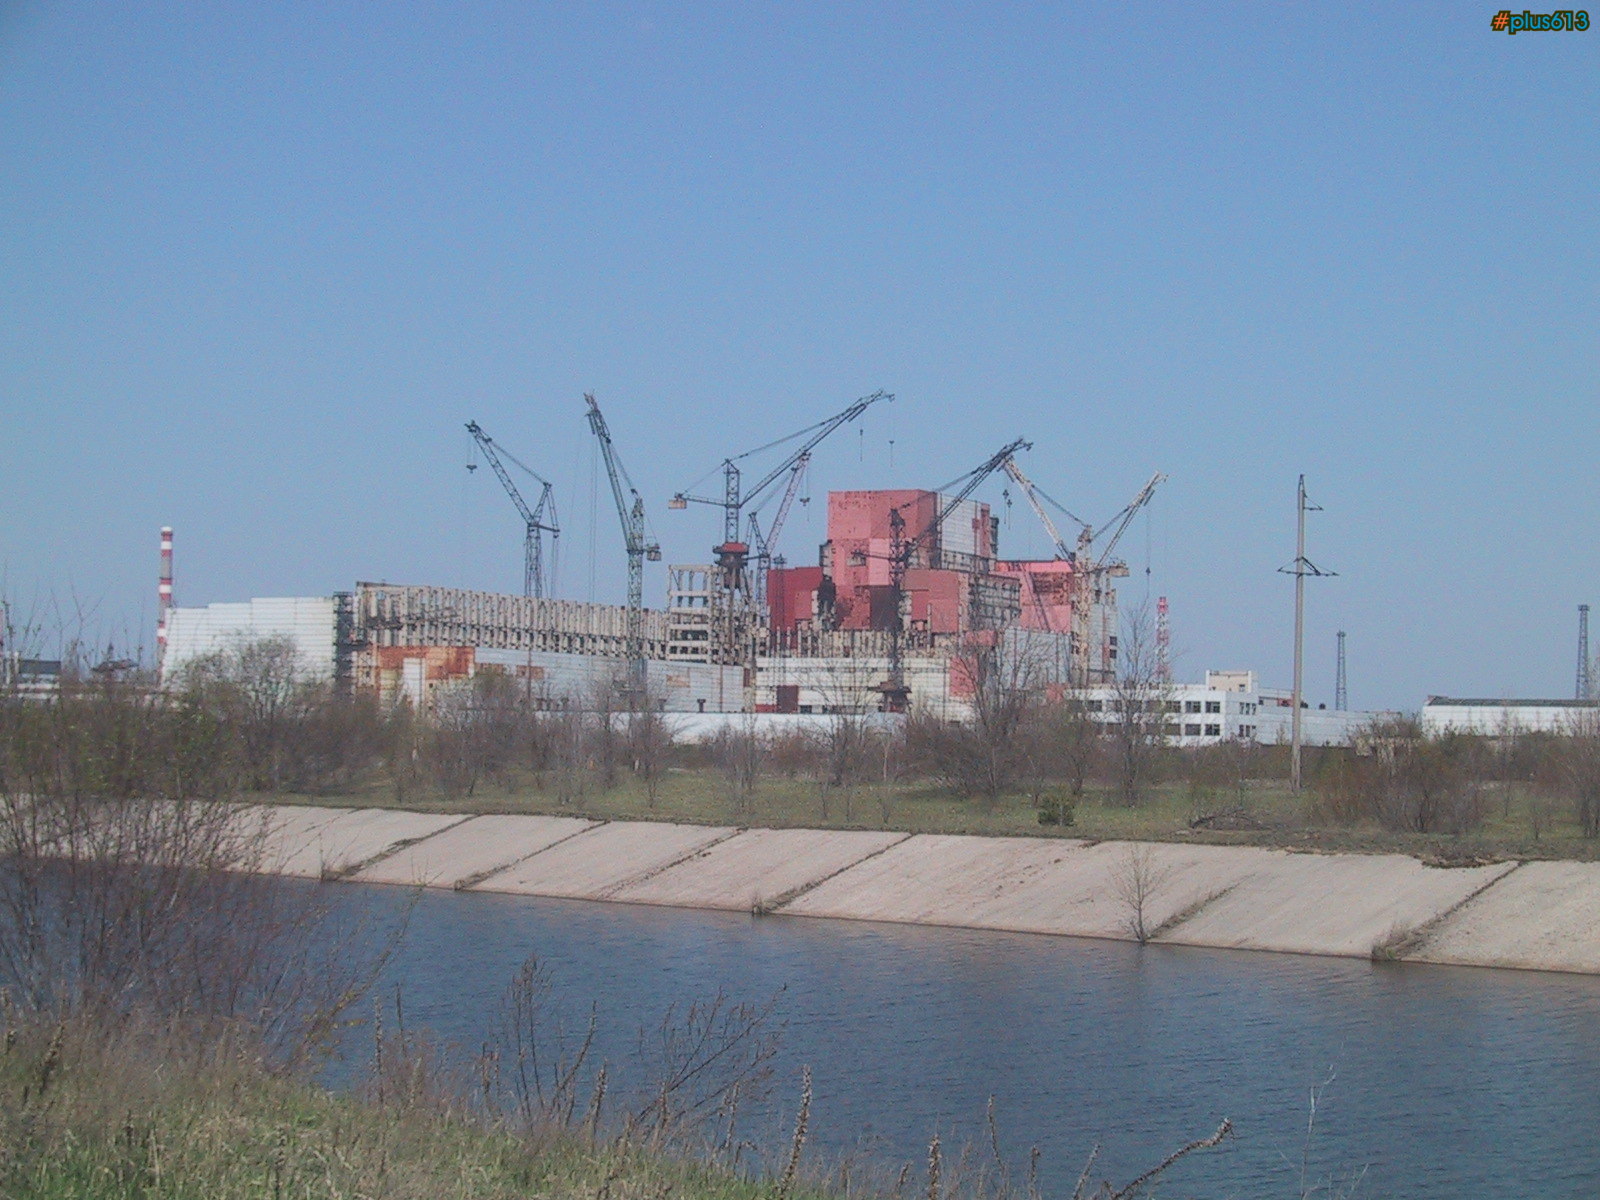 Chernobyl - construction of (never completed) reactors 5 - 8